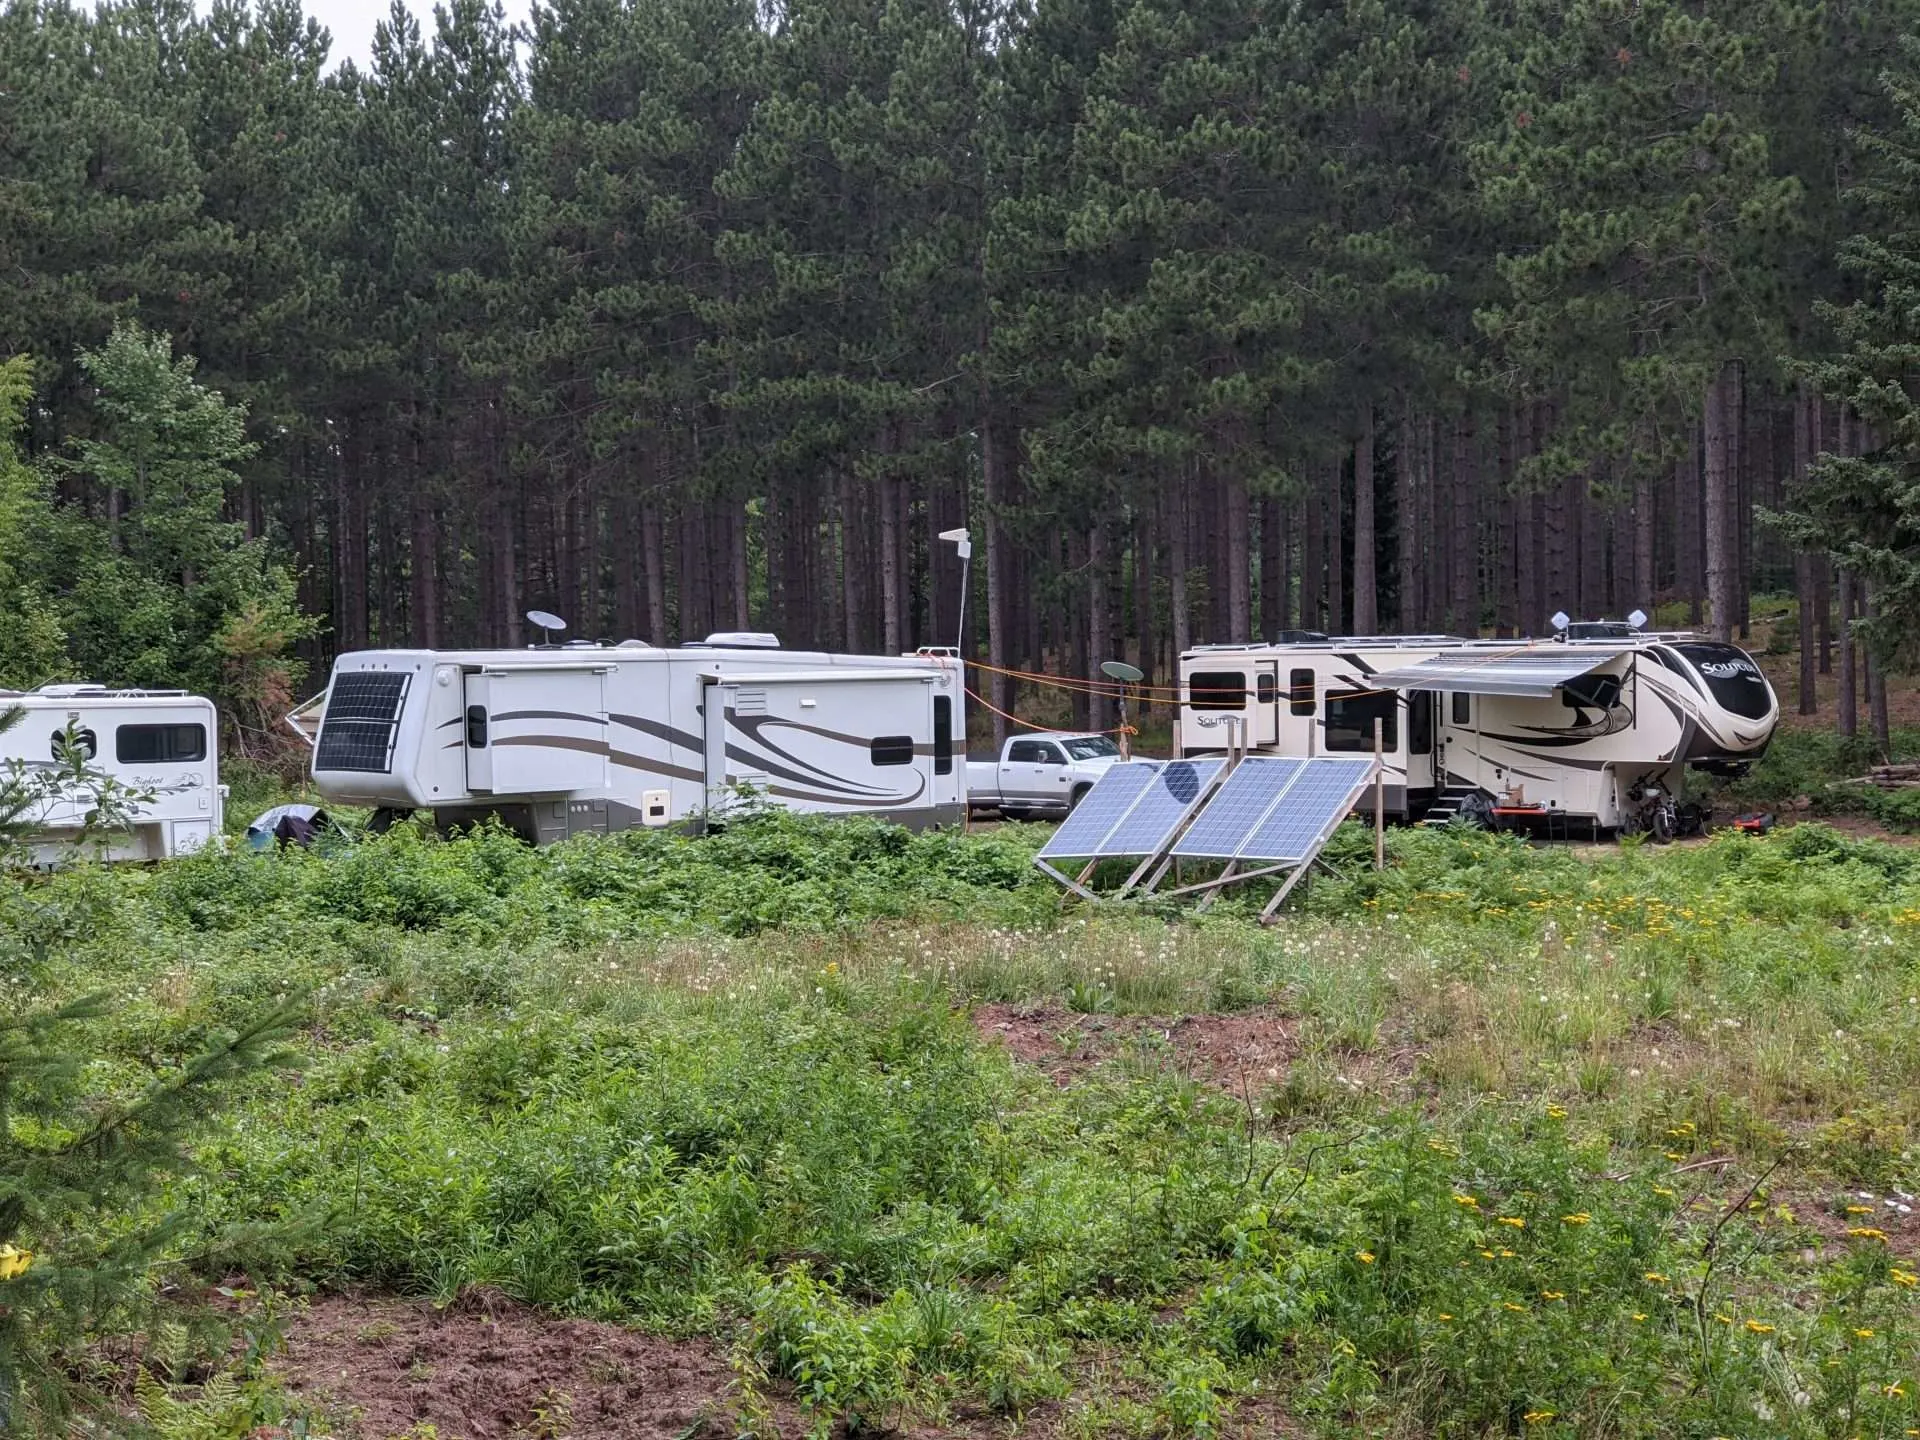 RVs parked at campsite with solar panels installed on roof and in front of RV